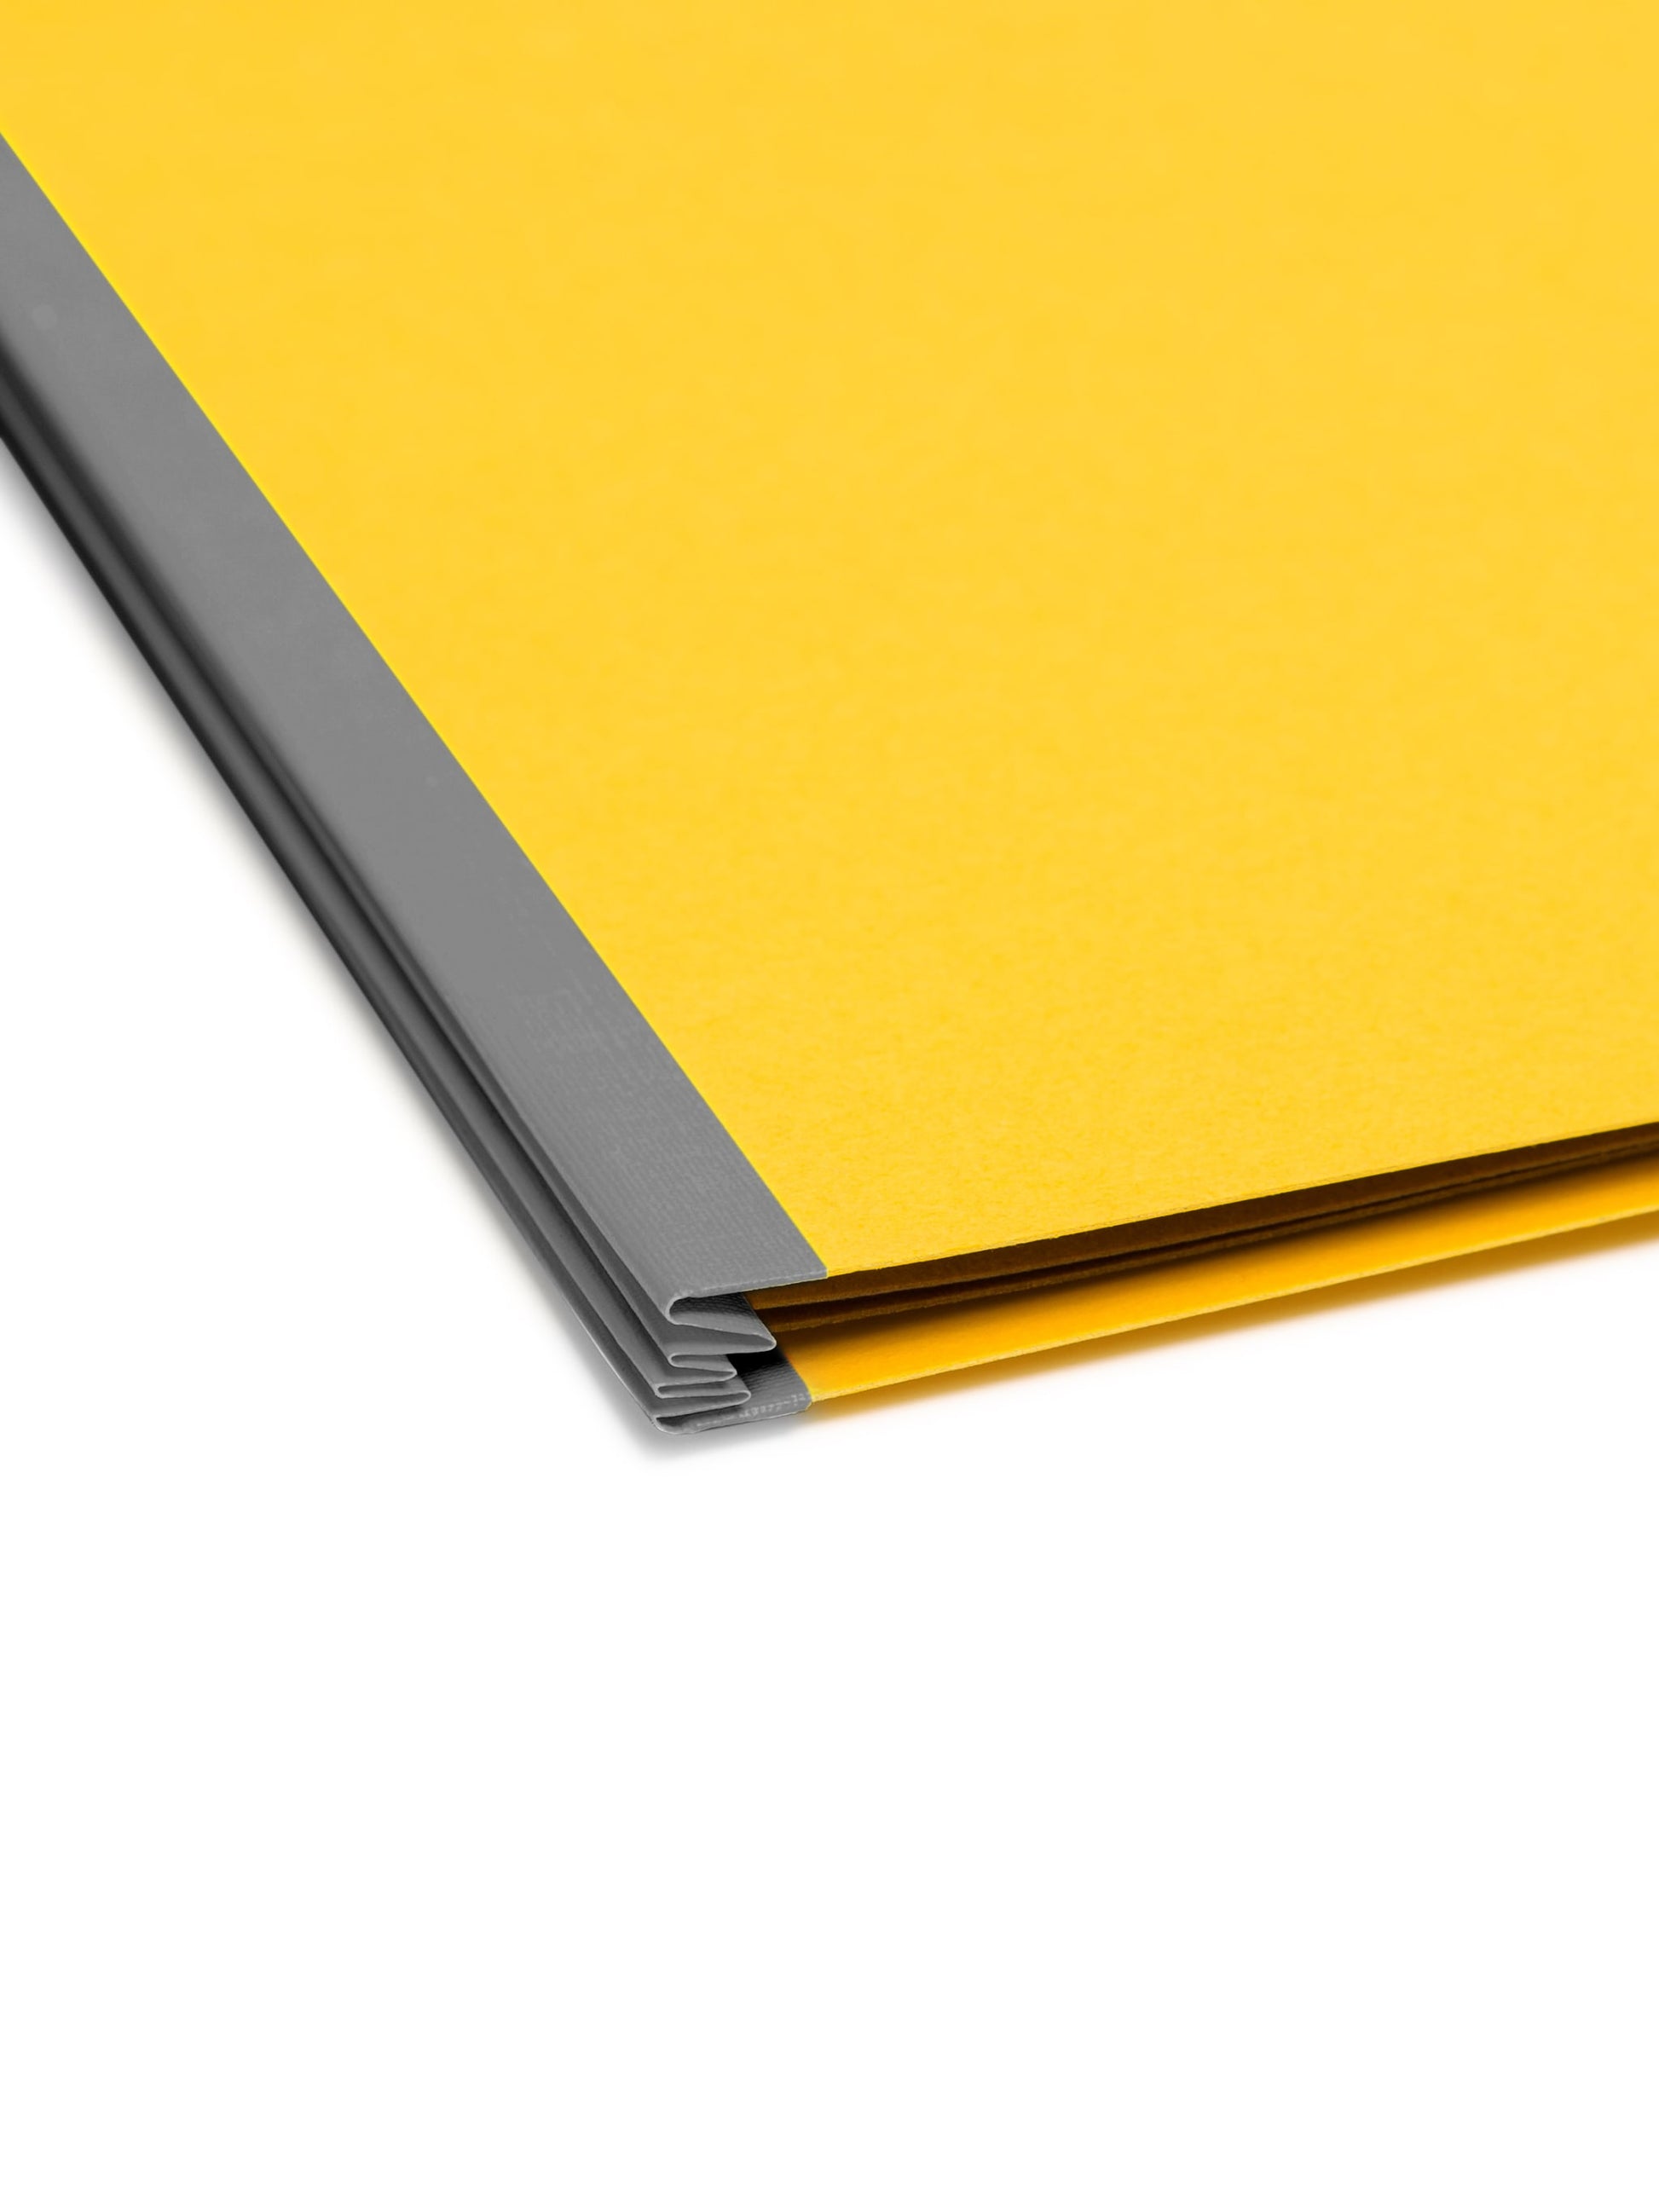 SafeSHIELD® Pressboard Classification File Folders, 1 Divider, 2 inch Expansion, Yellow Color, Legal Size, Set of 0, 30086486187344